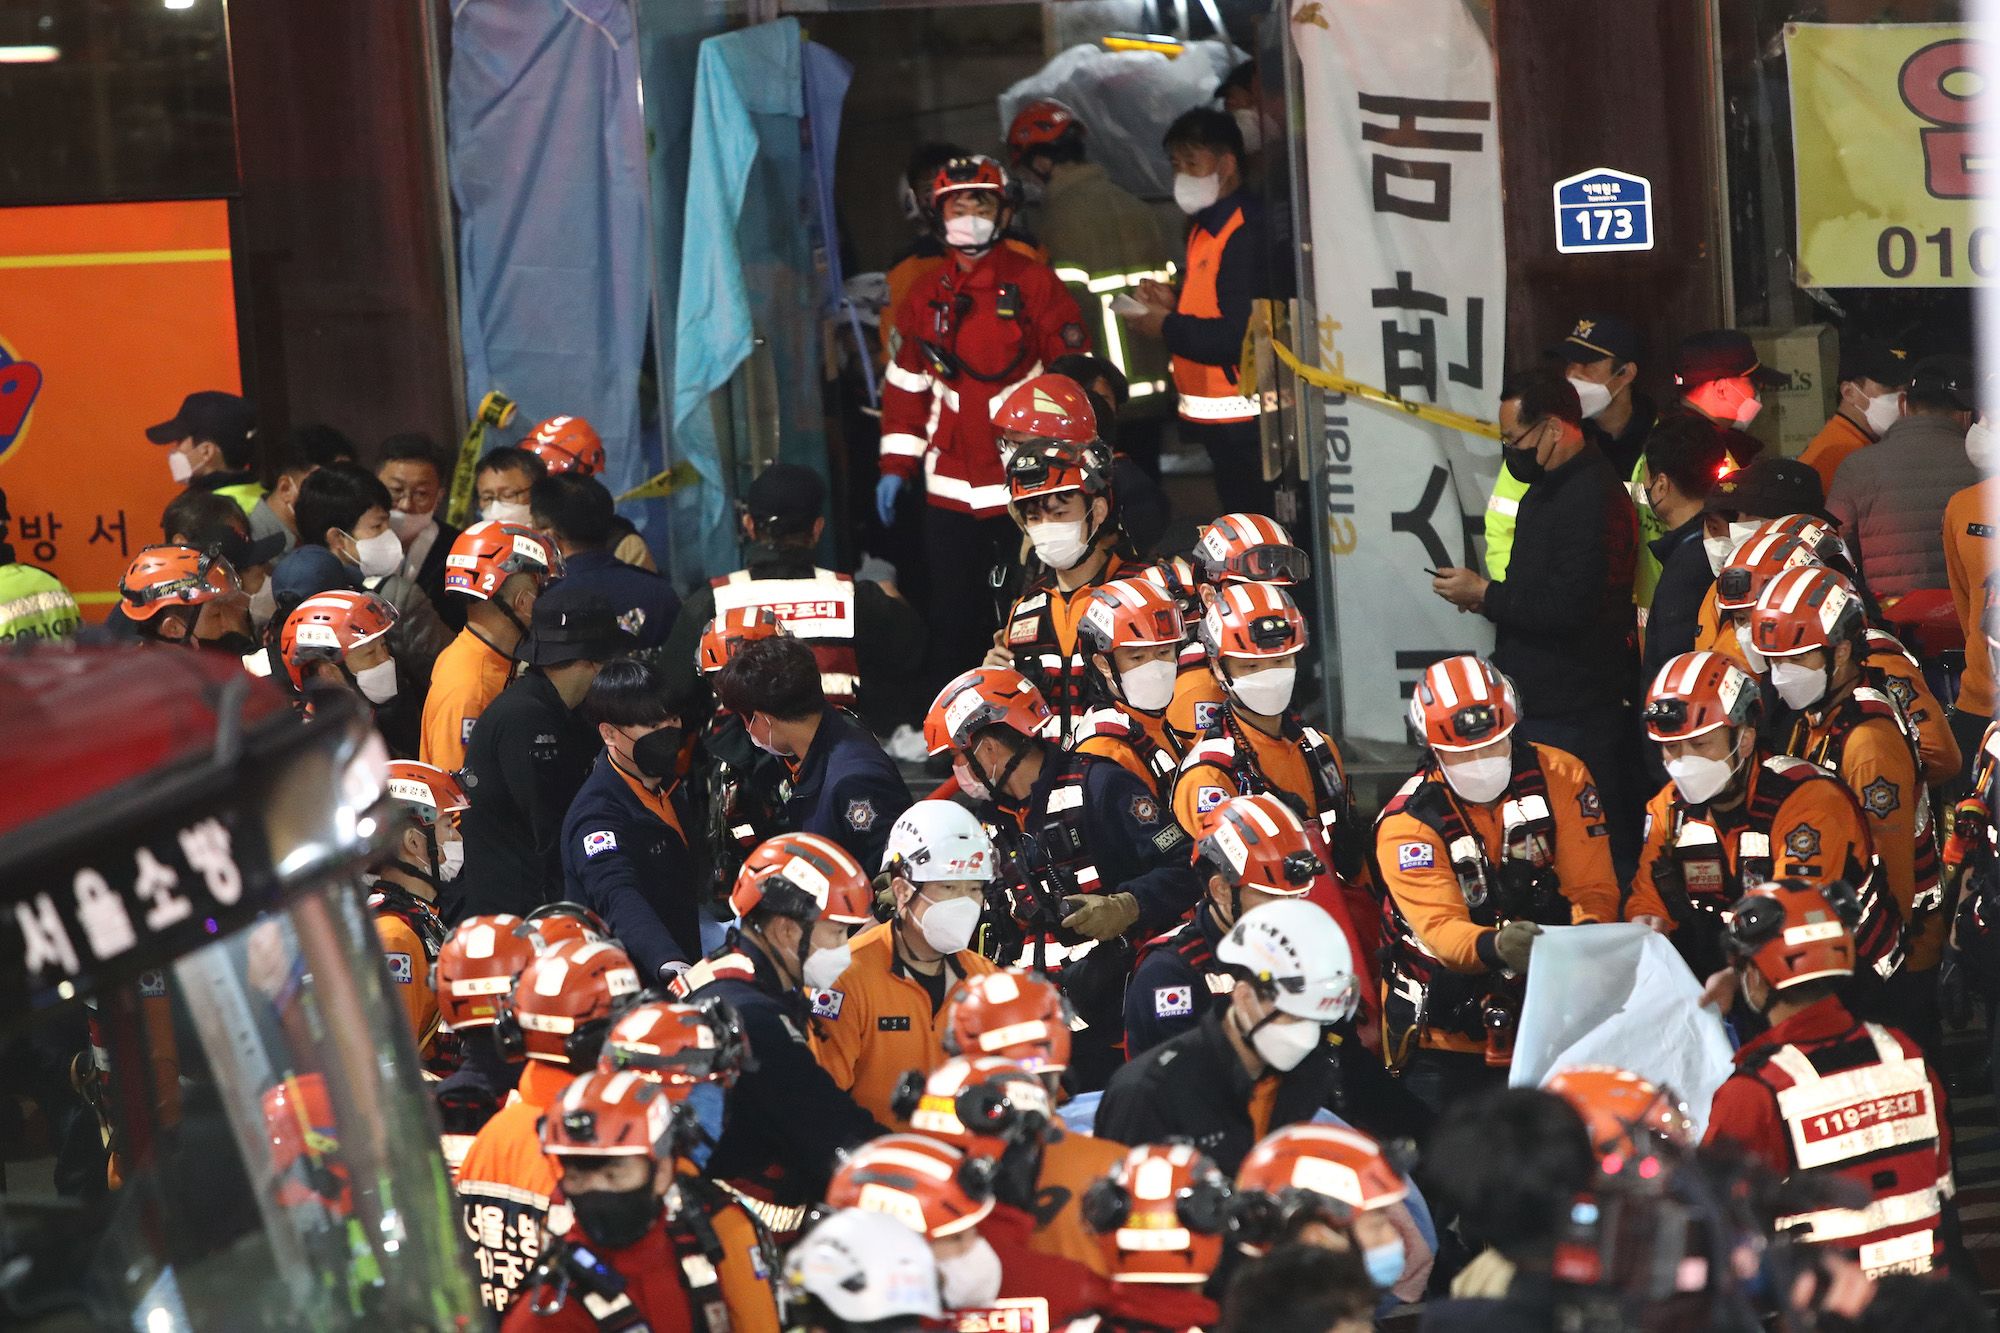 South Korea cancels govt briefings, events after deadly Halloween